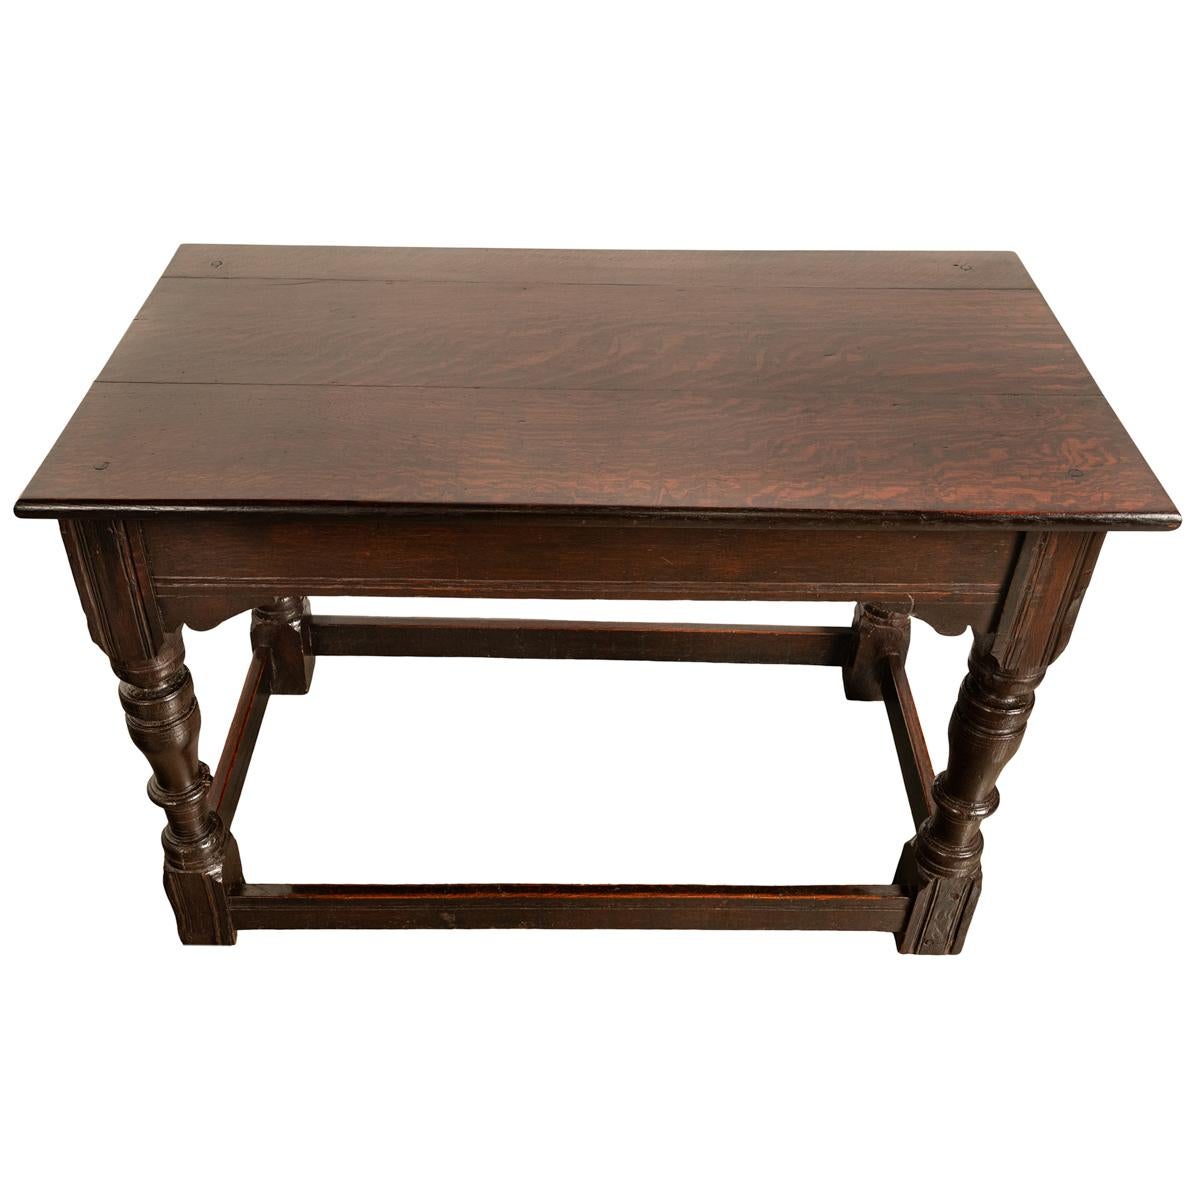 Turned Antique 17th Century Charles II Country Oak Refectory Side Serving Table 1680 For Sale